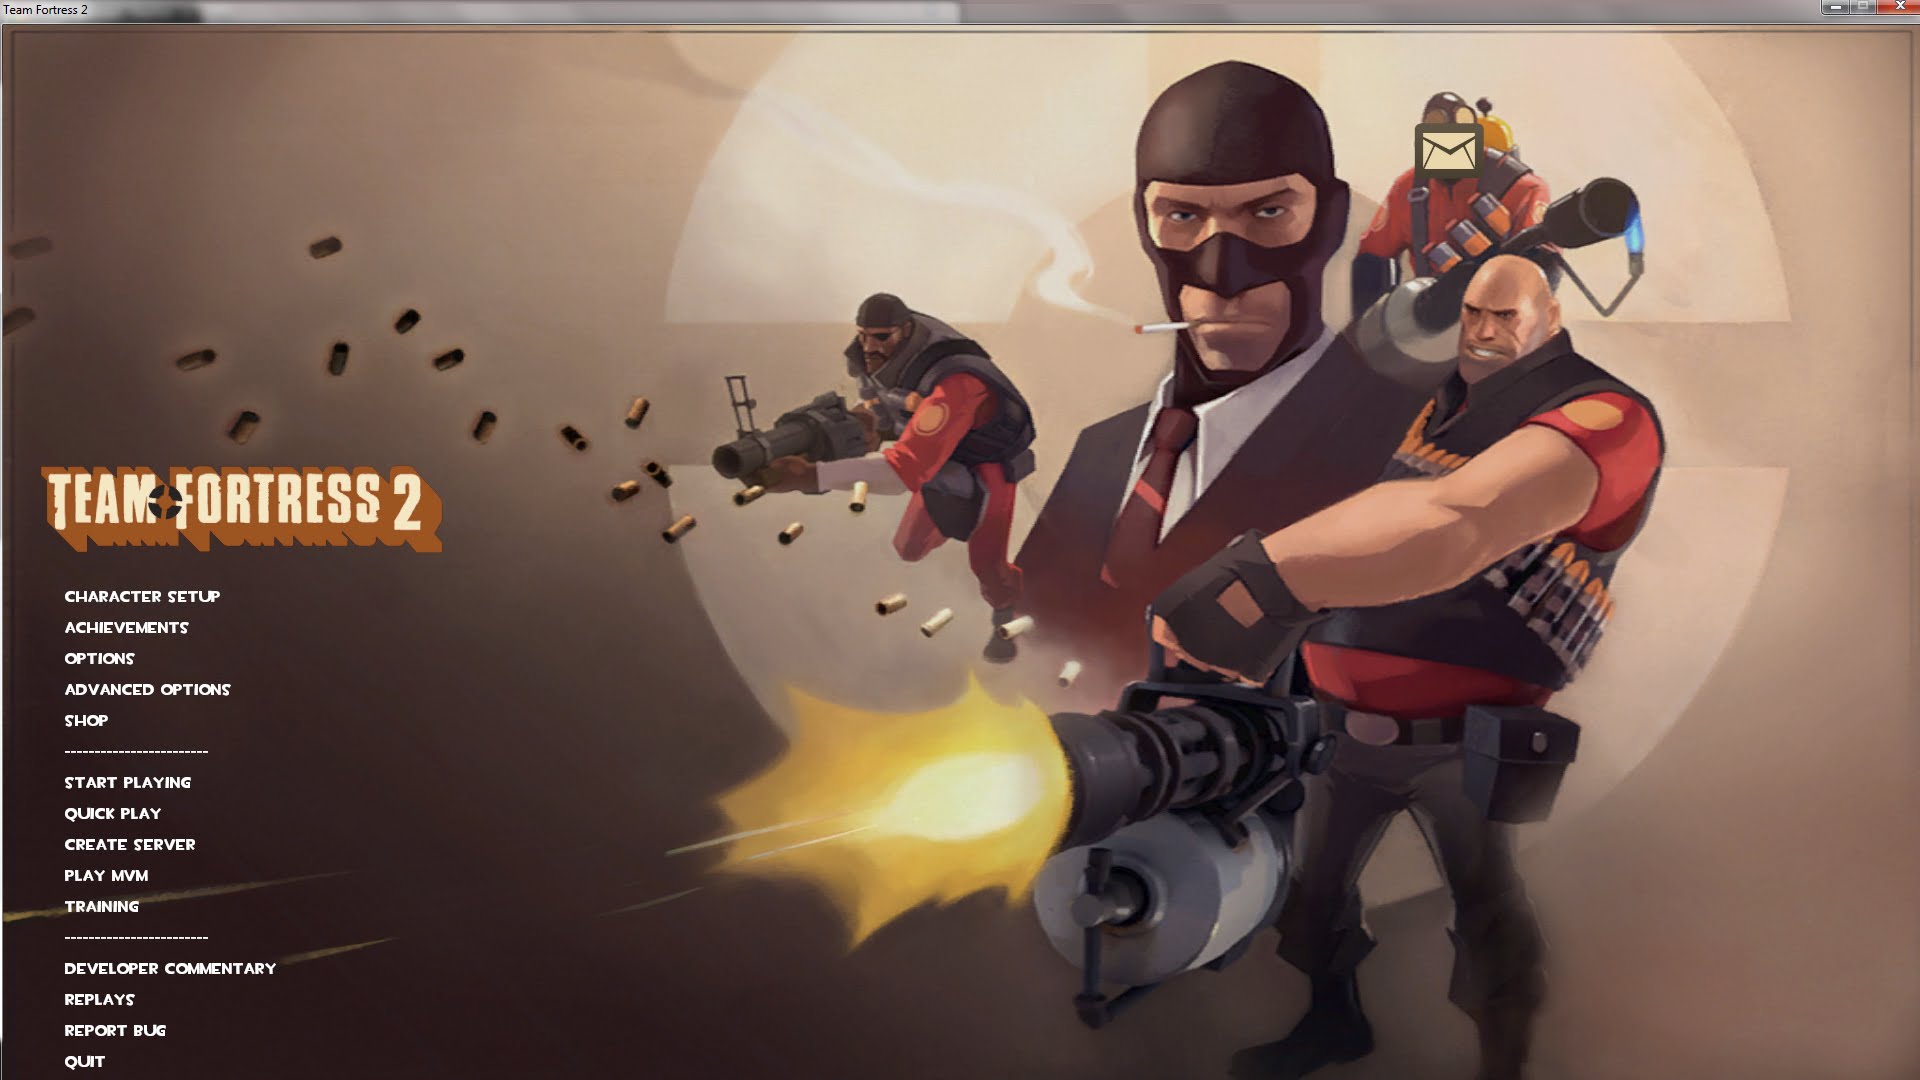 Classic Team Fortress 2 Menu Theme Backgrounds, and Classic